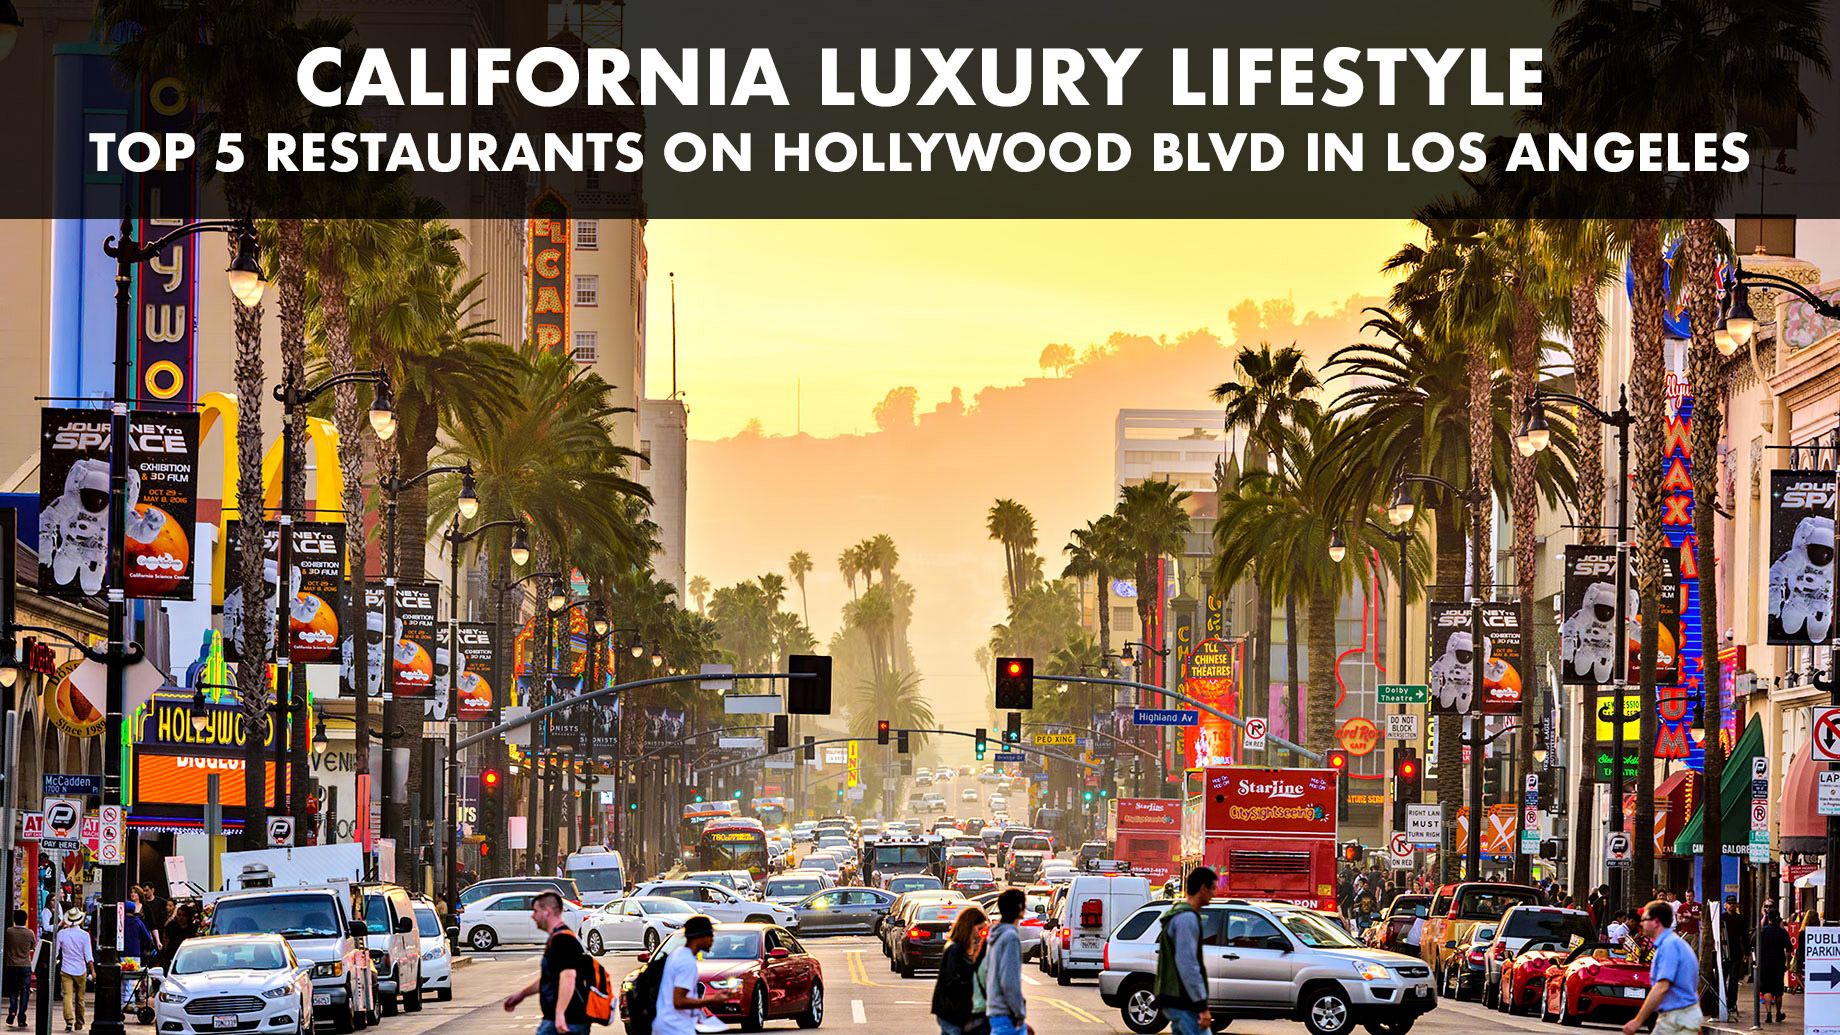 California Luxury Lifestyle - Top 5 Restaurants on Hollywood Blvd in Los Angeles